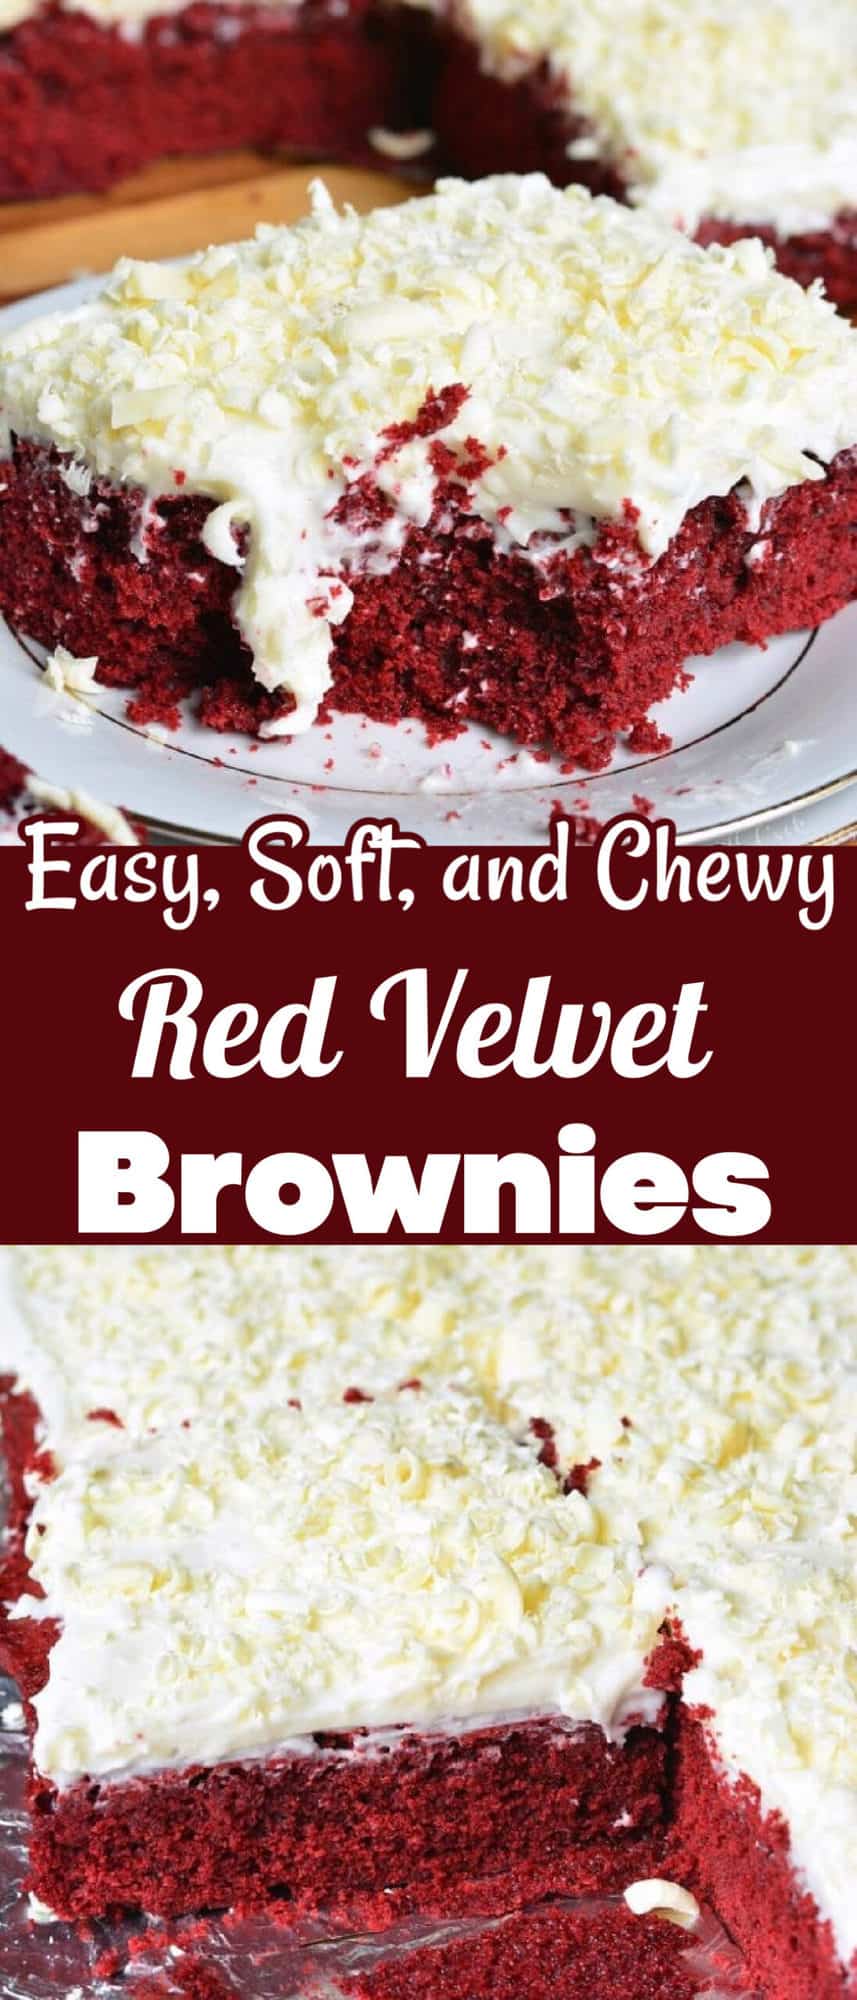 collage of two images close up red velvet brownies and a title